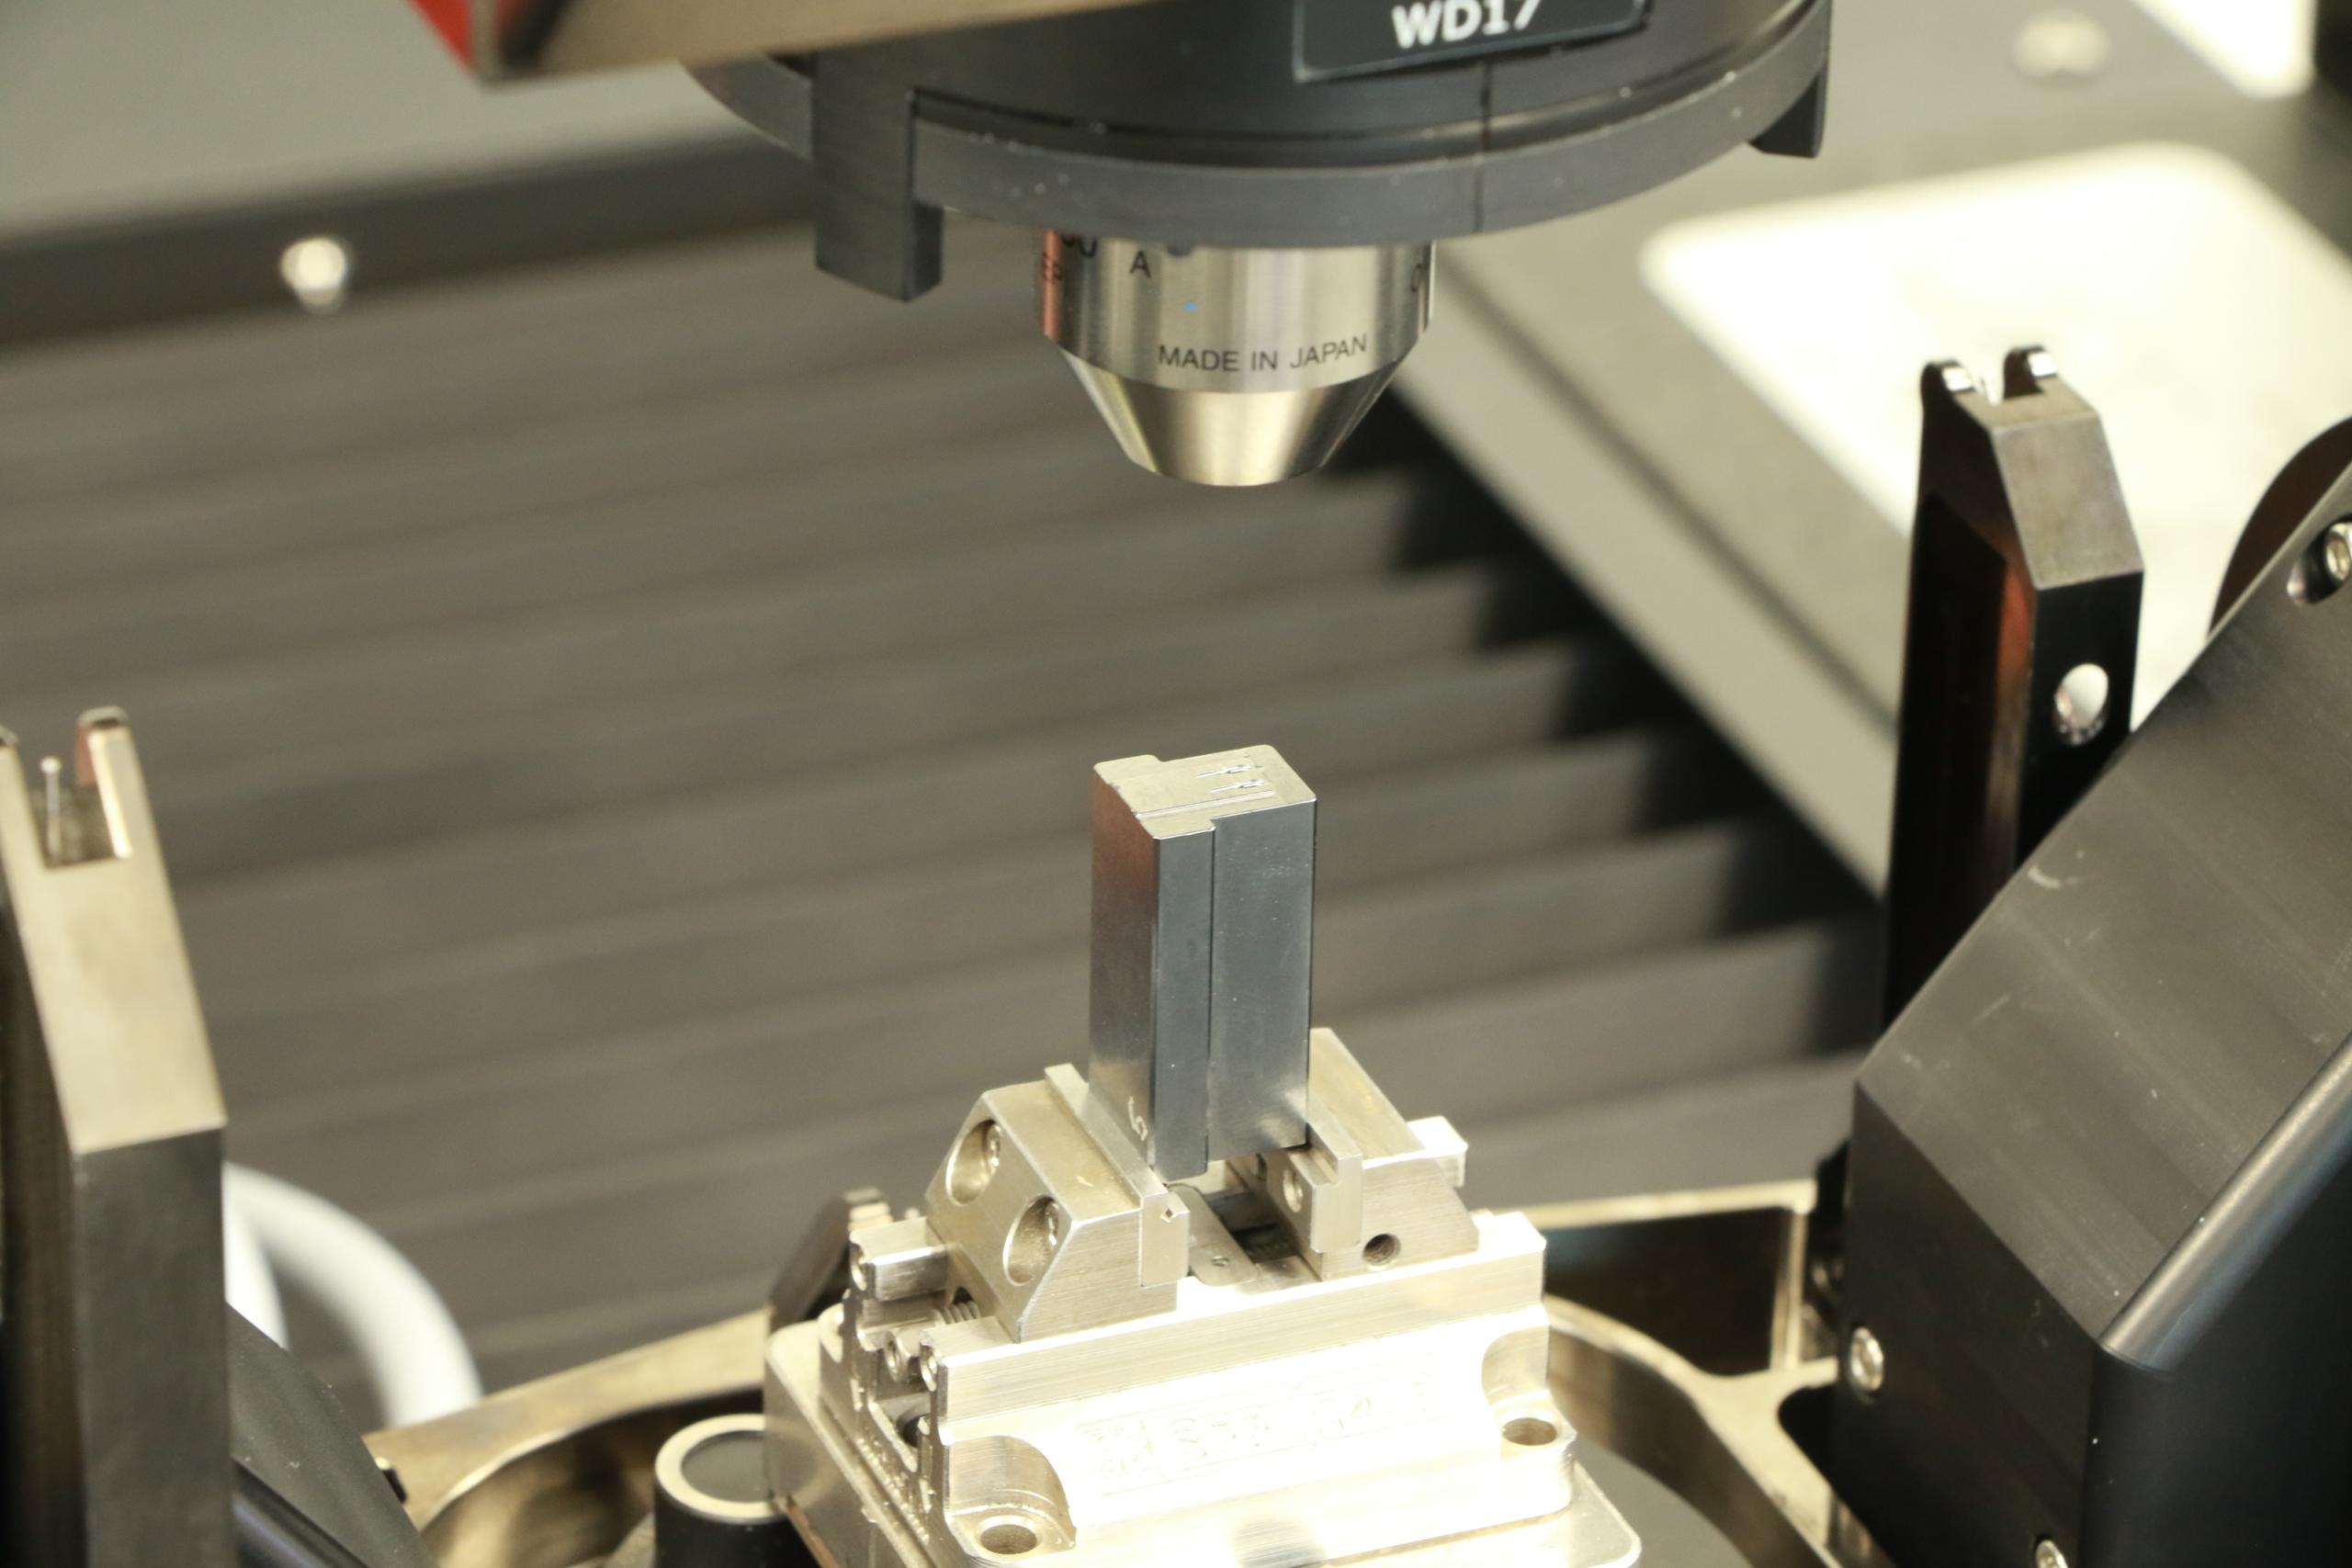 Optical measurement of punches